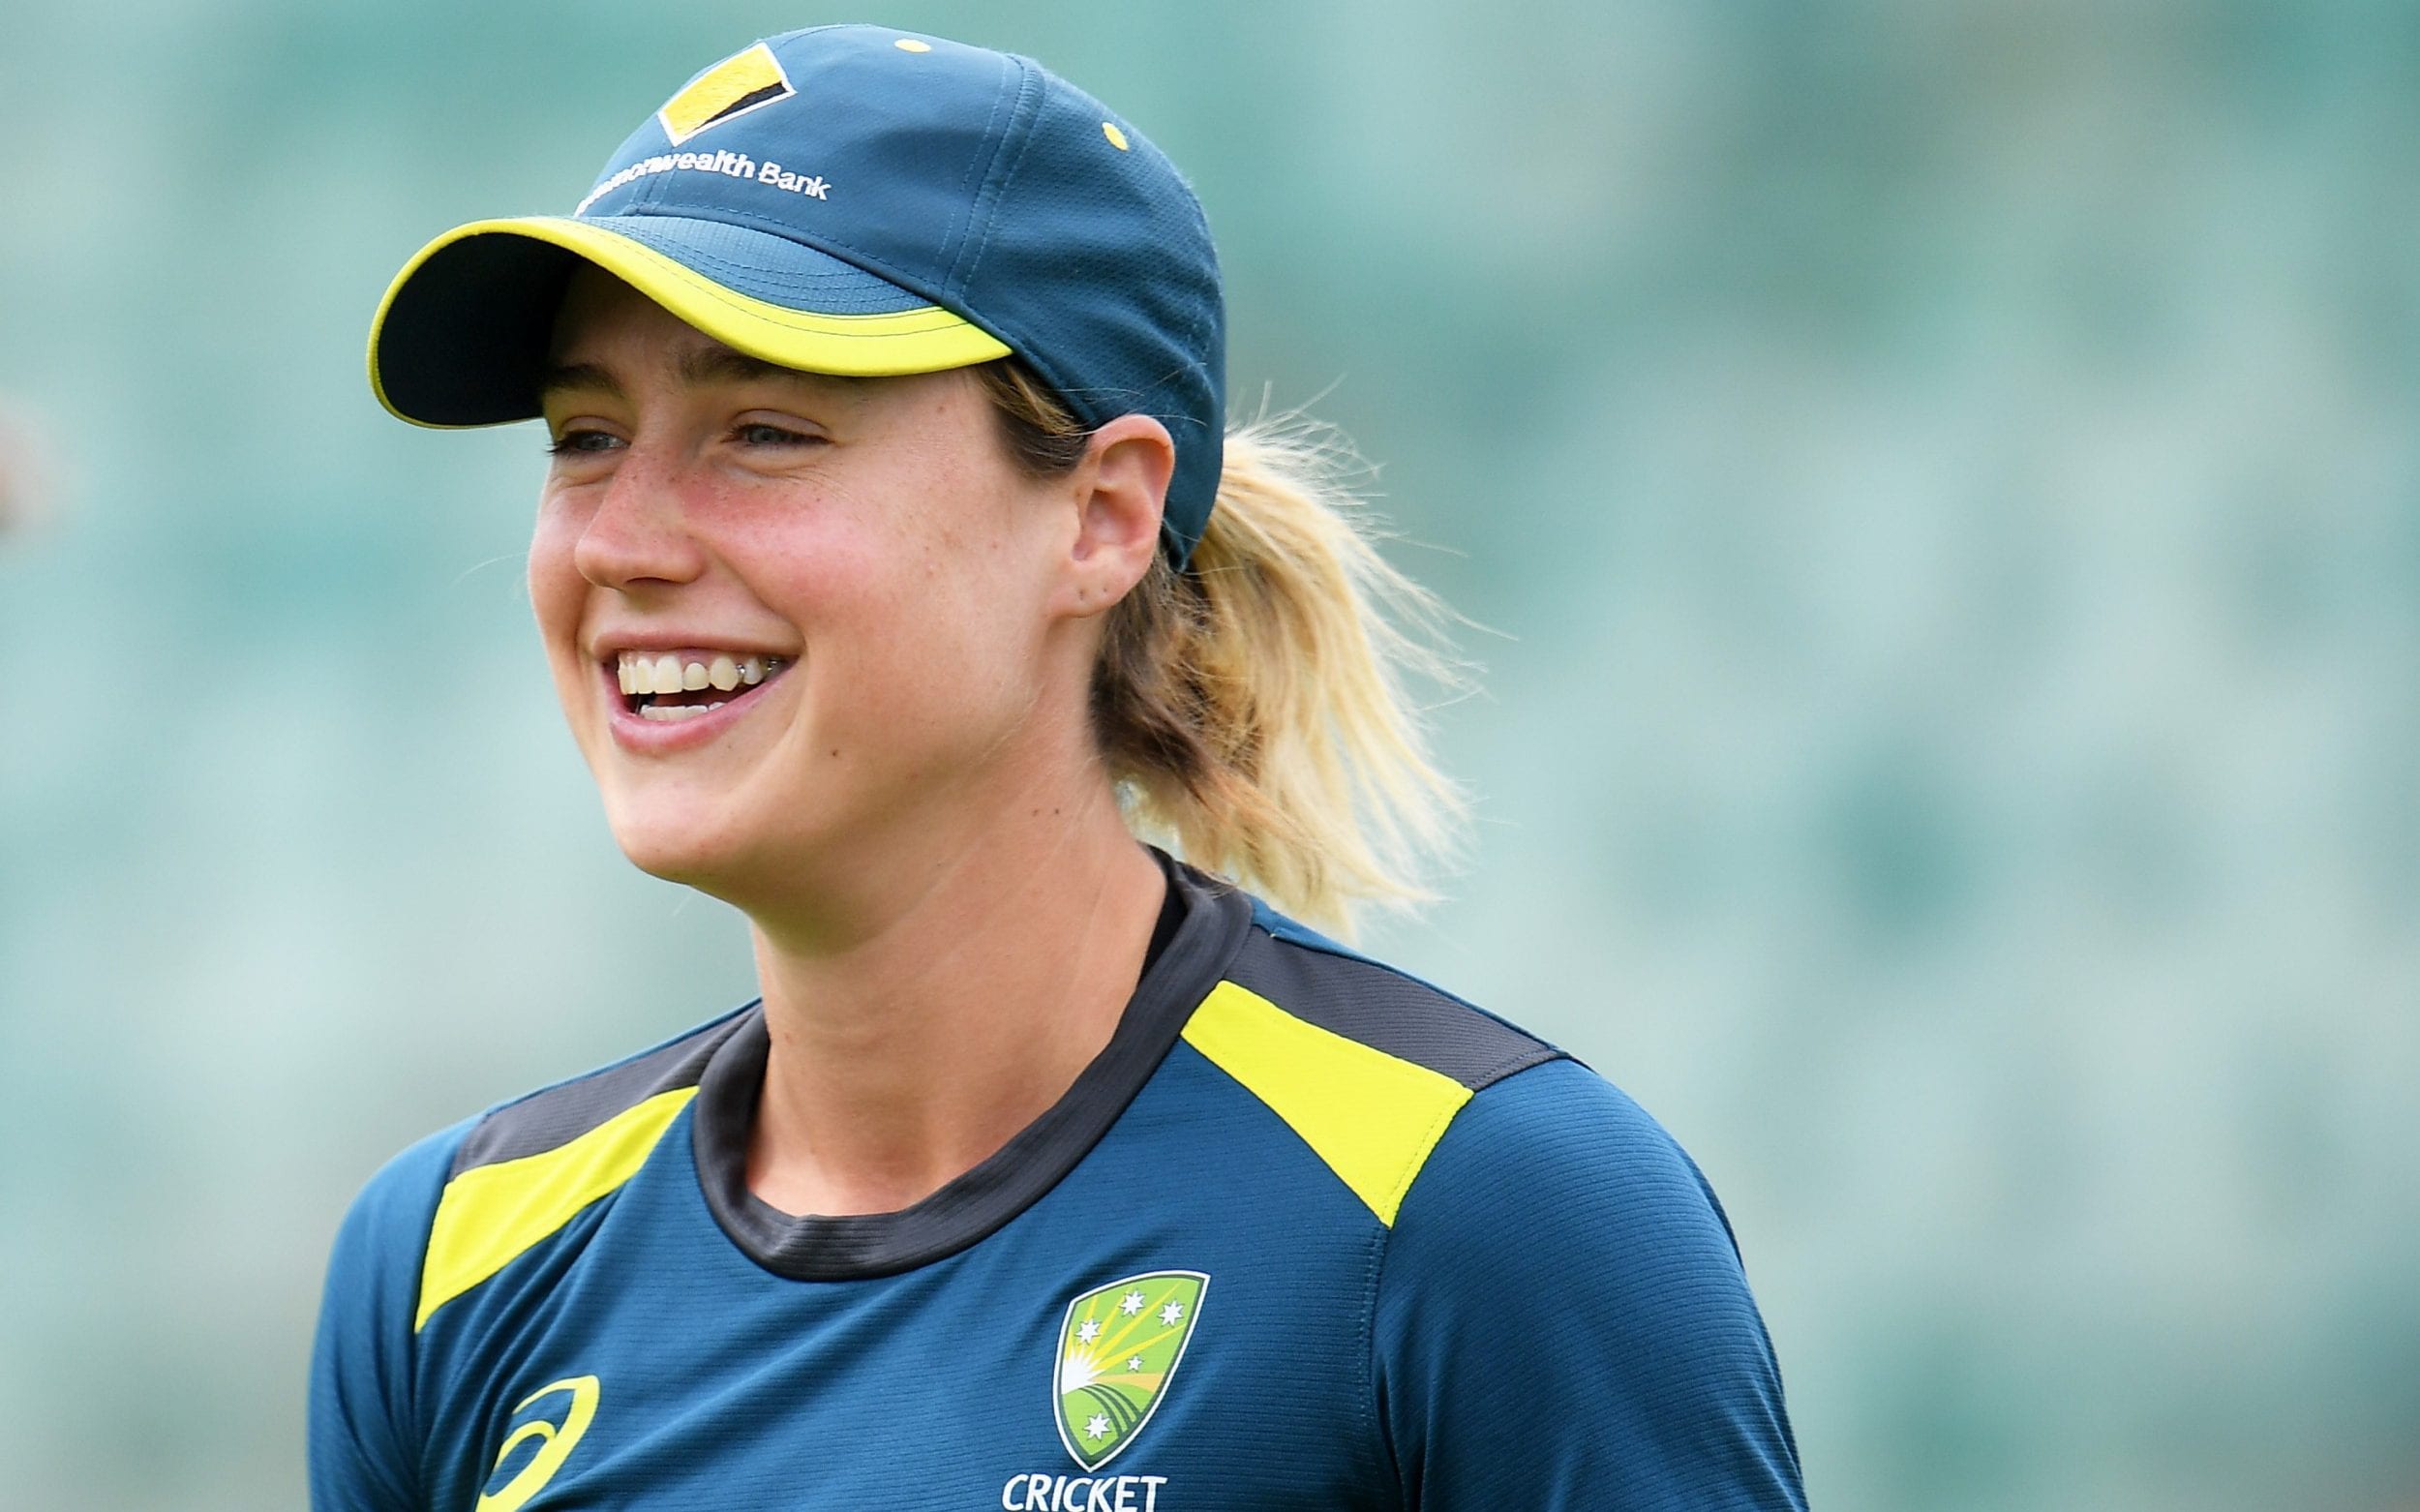 Top 5 Best Women Cricketers of the World 